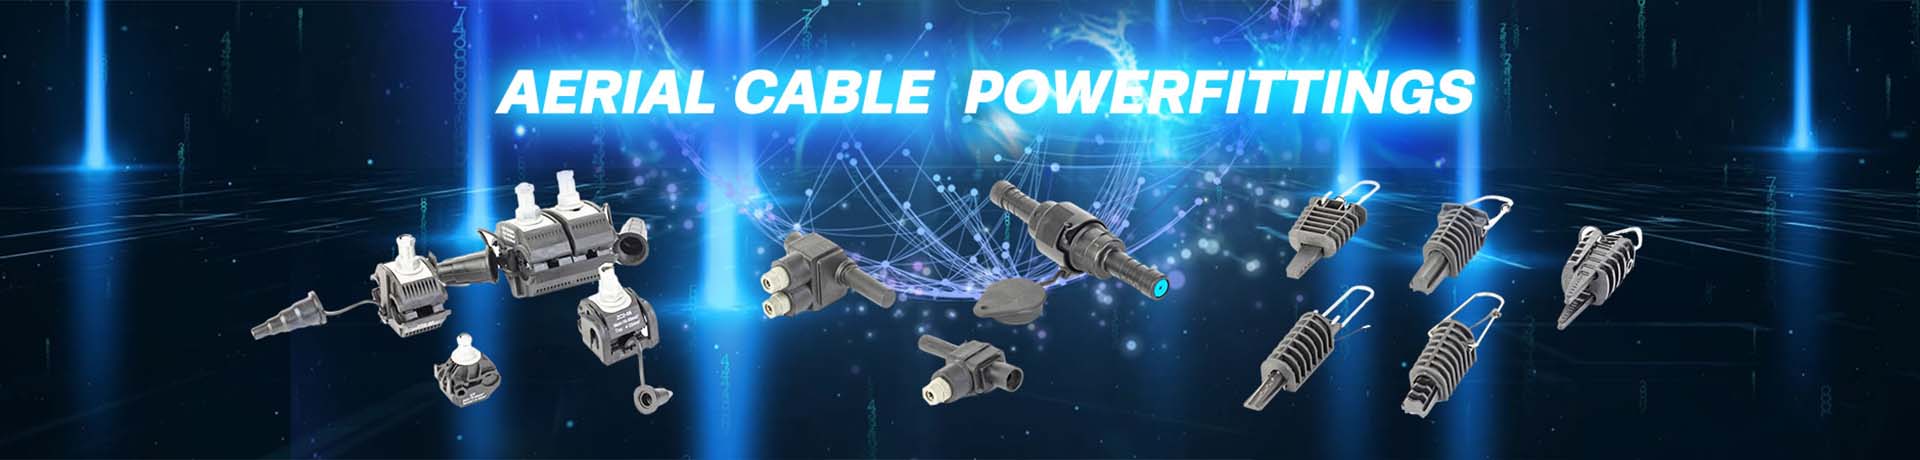 Aerial Cable Powerfitting